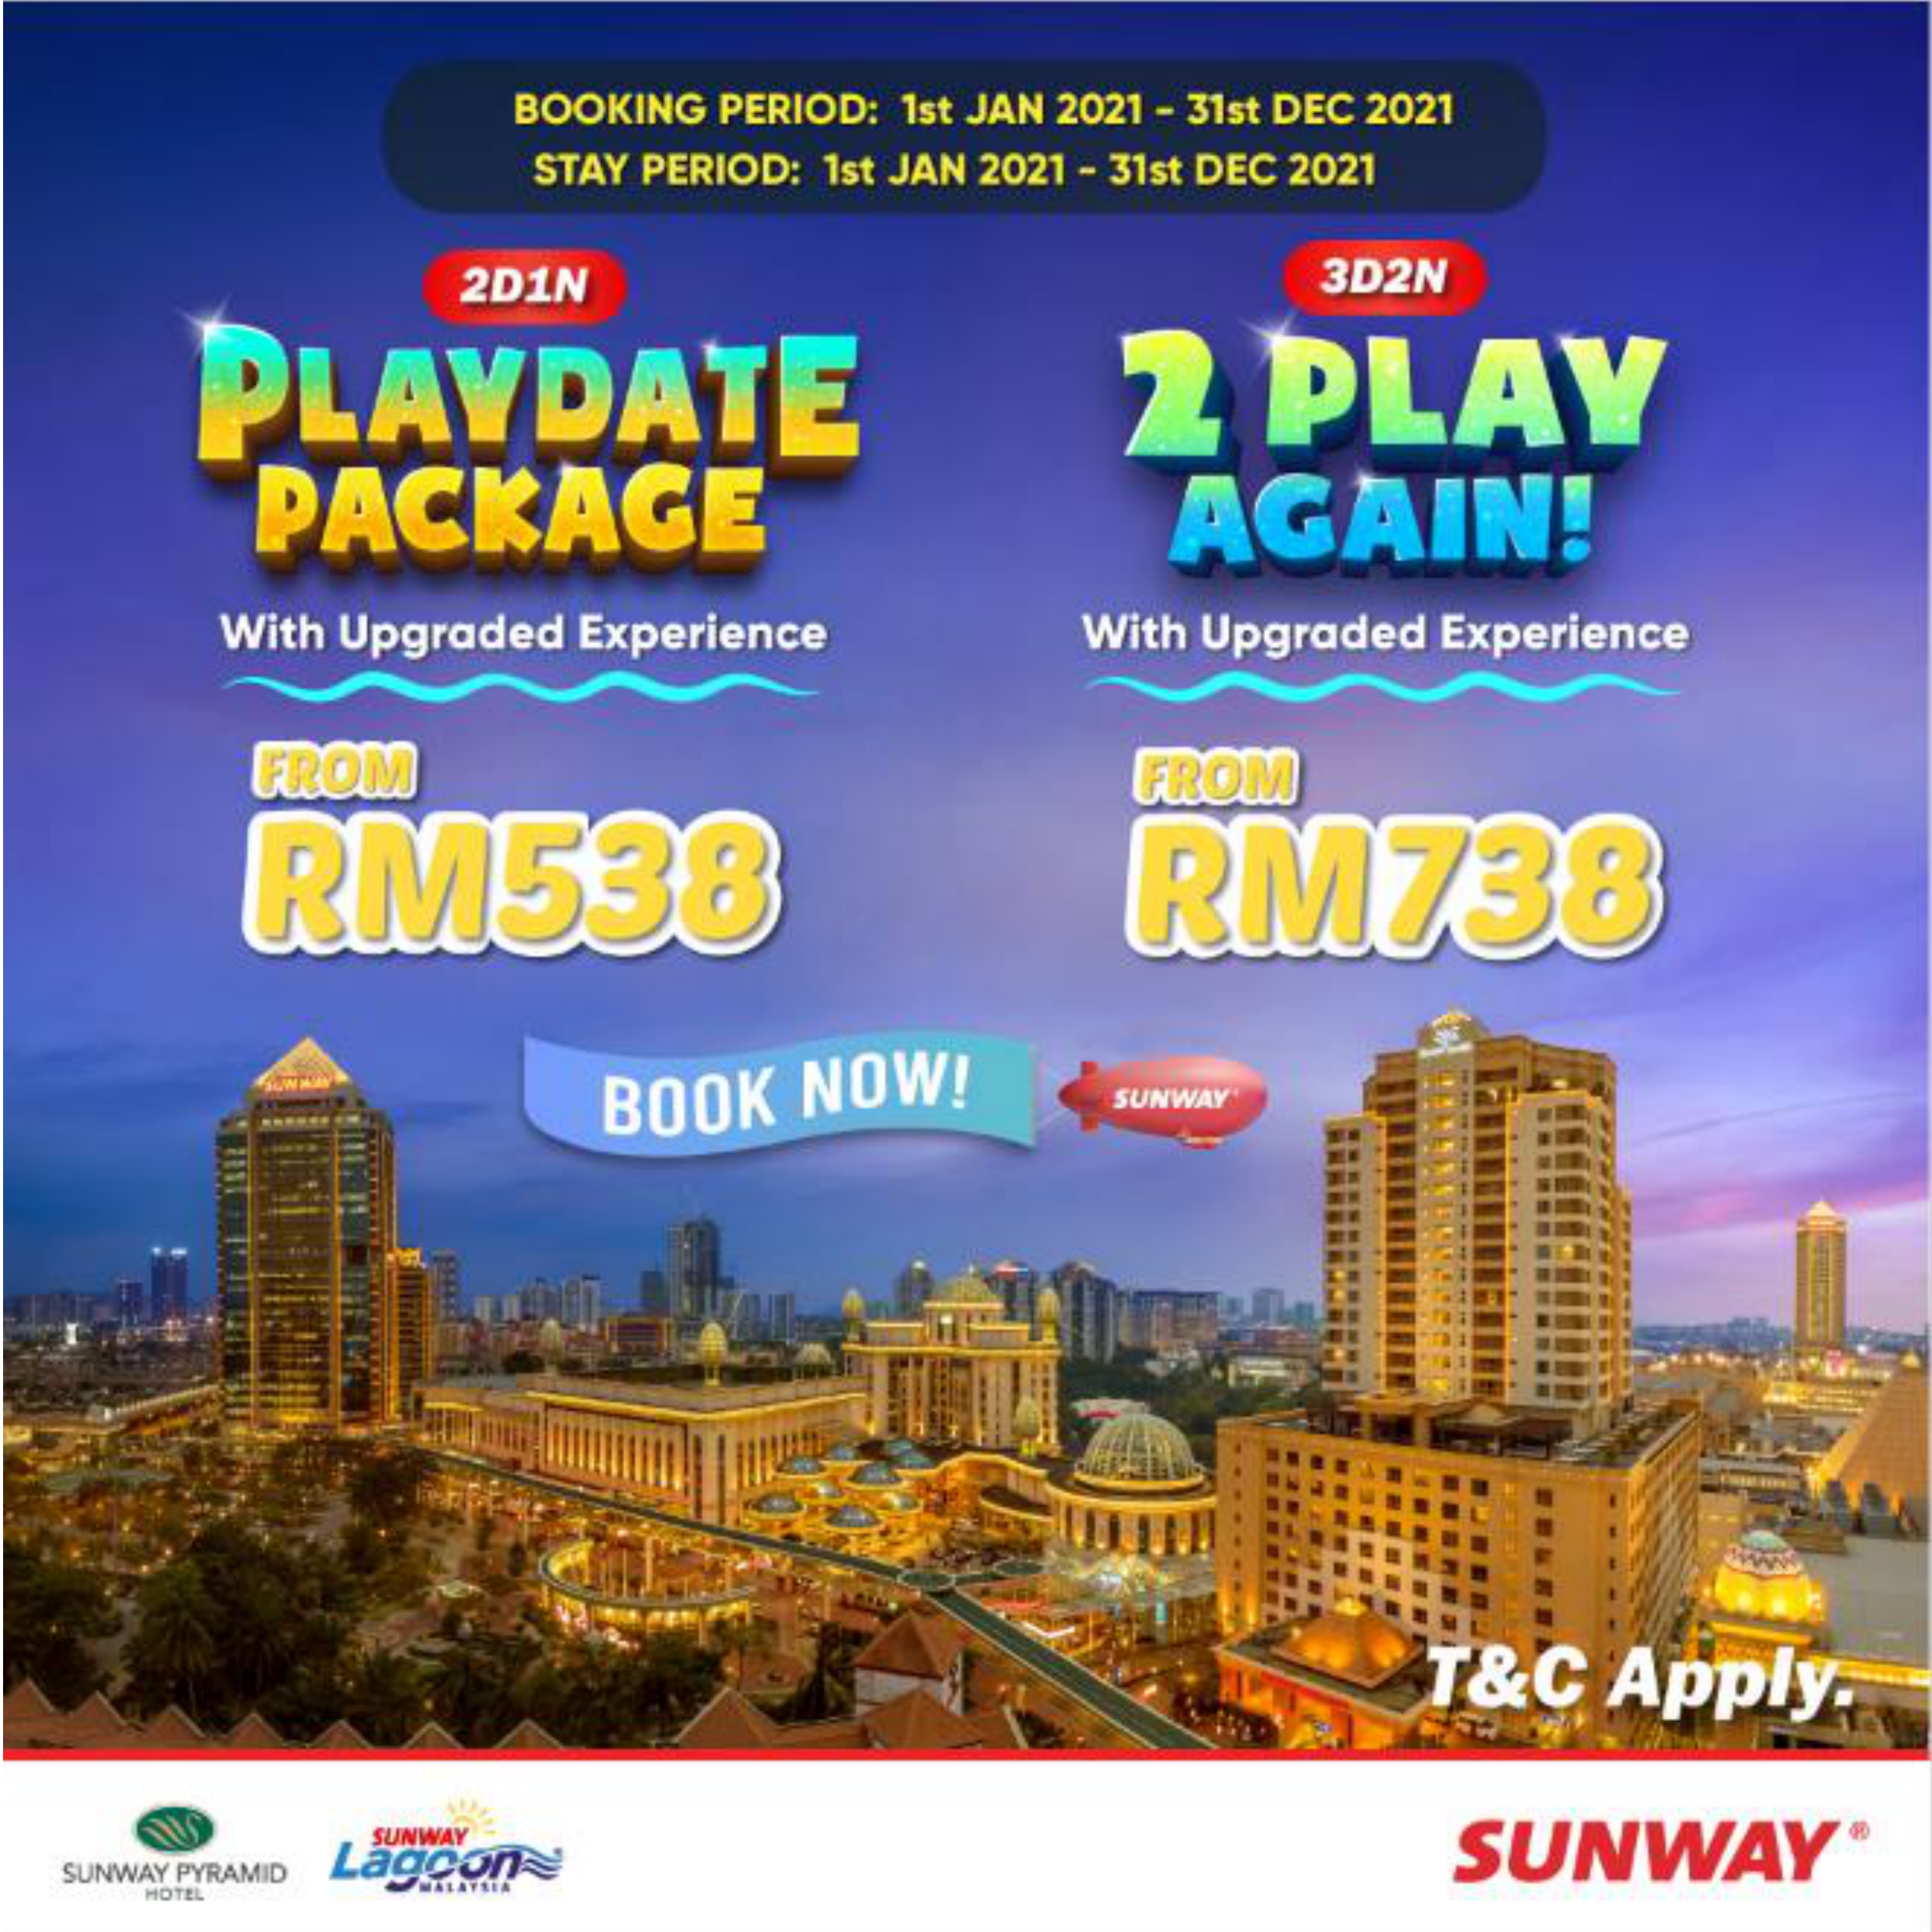 promotion package is now redeemable with sunway lagoon theme park reopening